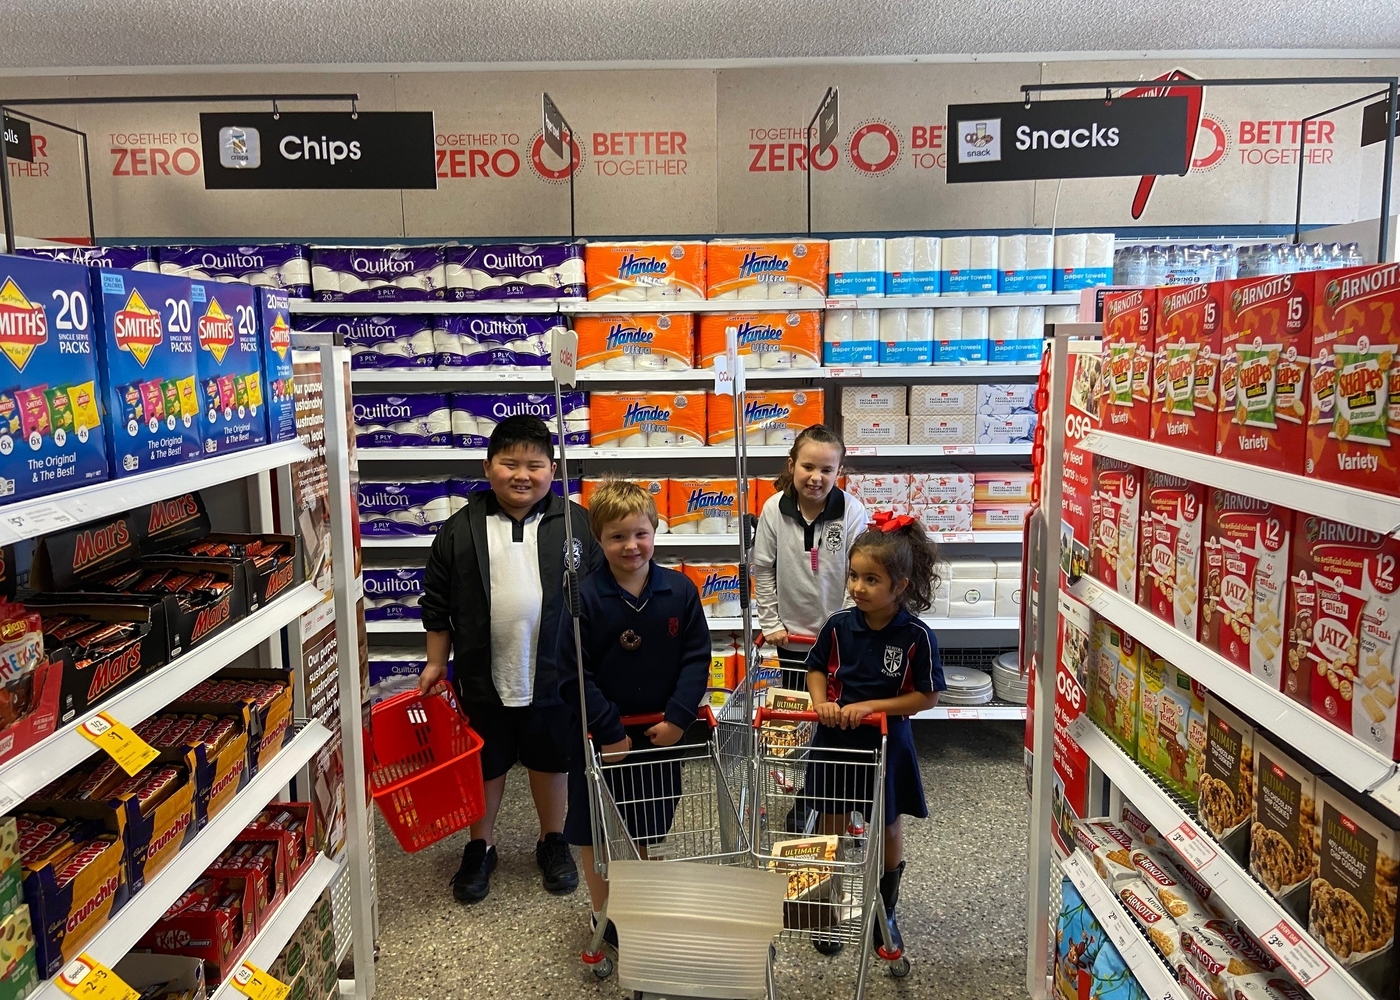 Coles has fitted out a fully functioning supermarket at St Lucy's School